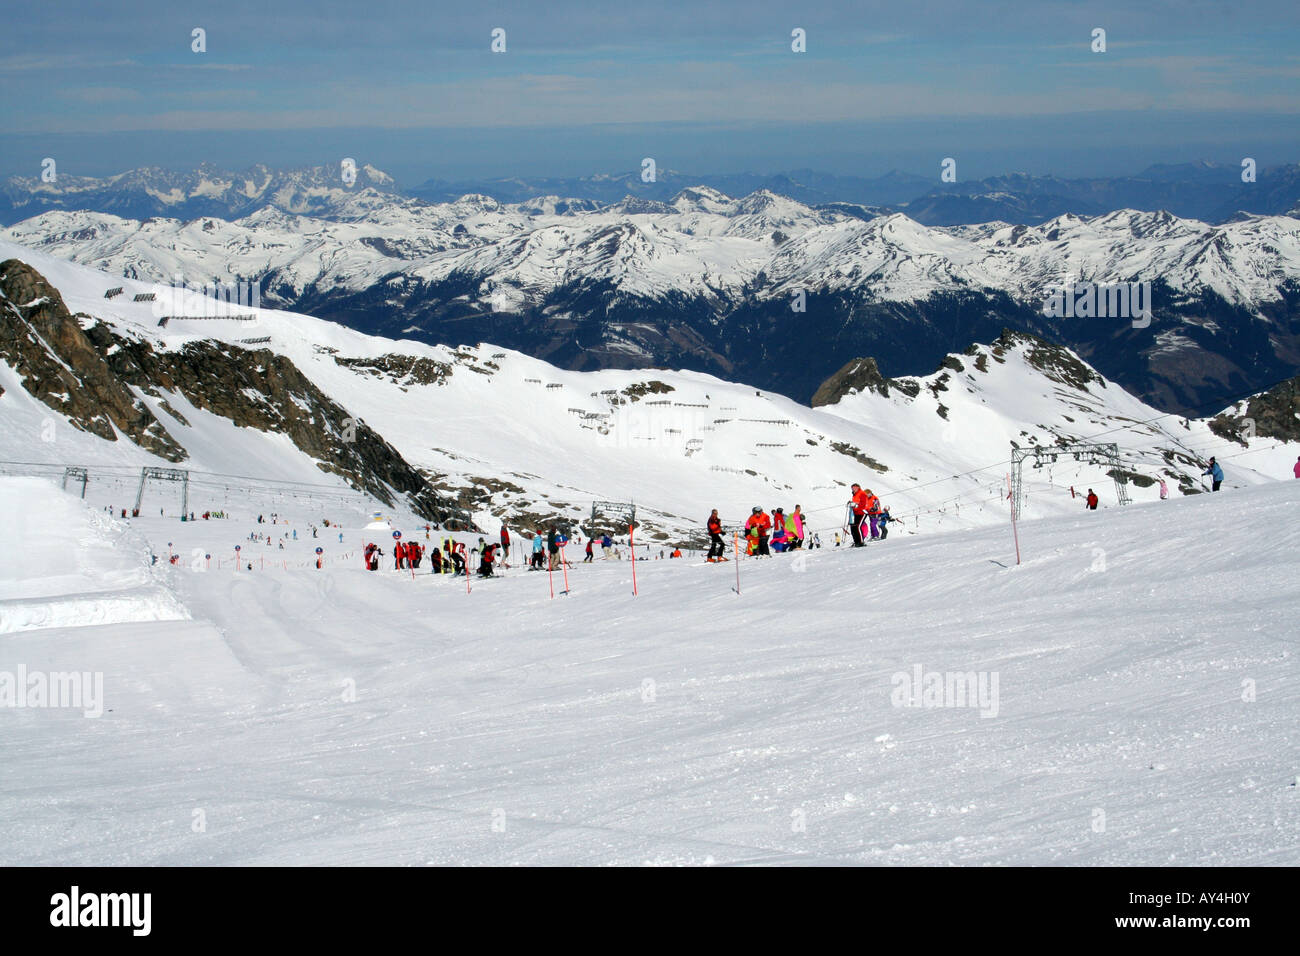 Skiers on snow covered slopes in winter resort of Crans Montana, Switzlerland. Stock Photo